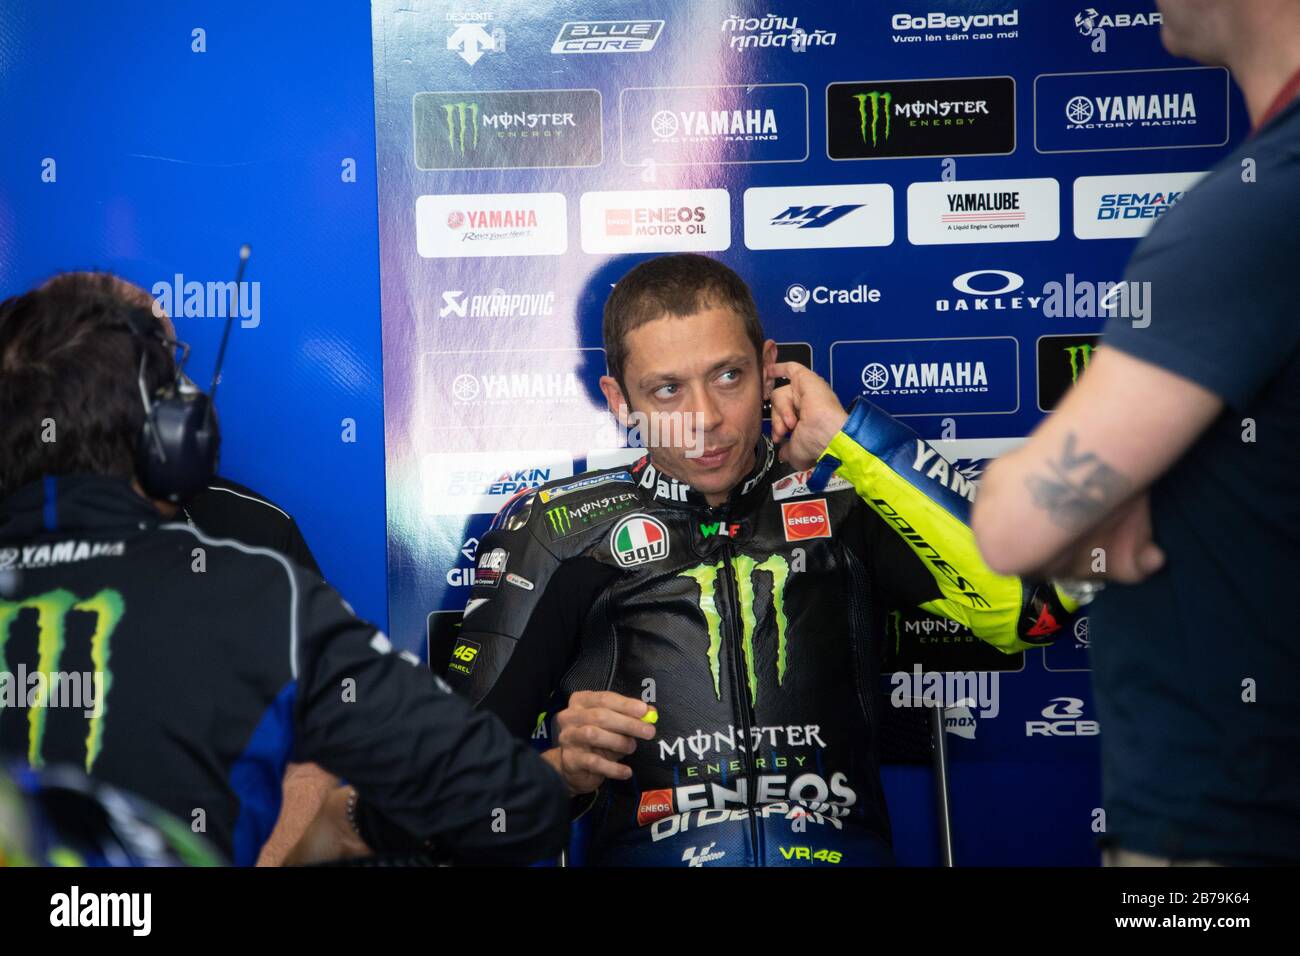 January 1, 2020, Italy, Italy: italy, Italy, , 01 Jan 2020, Italian MotoGP rider, number 46 Valentino Rossi, of the Yamaha Factory Racing during  -  - Credit: LM/Alessio Marini (Credit Image: © Alessio Marini/LPS via ZUMA Wire) Stock Photo